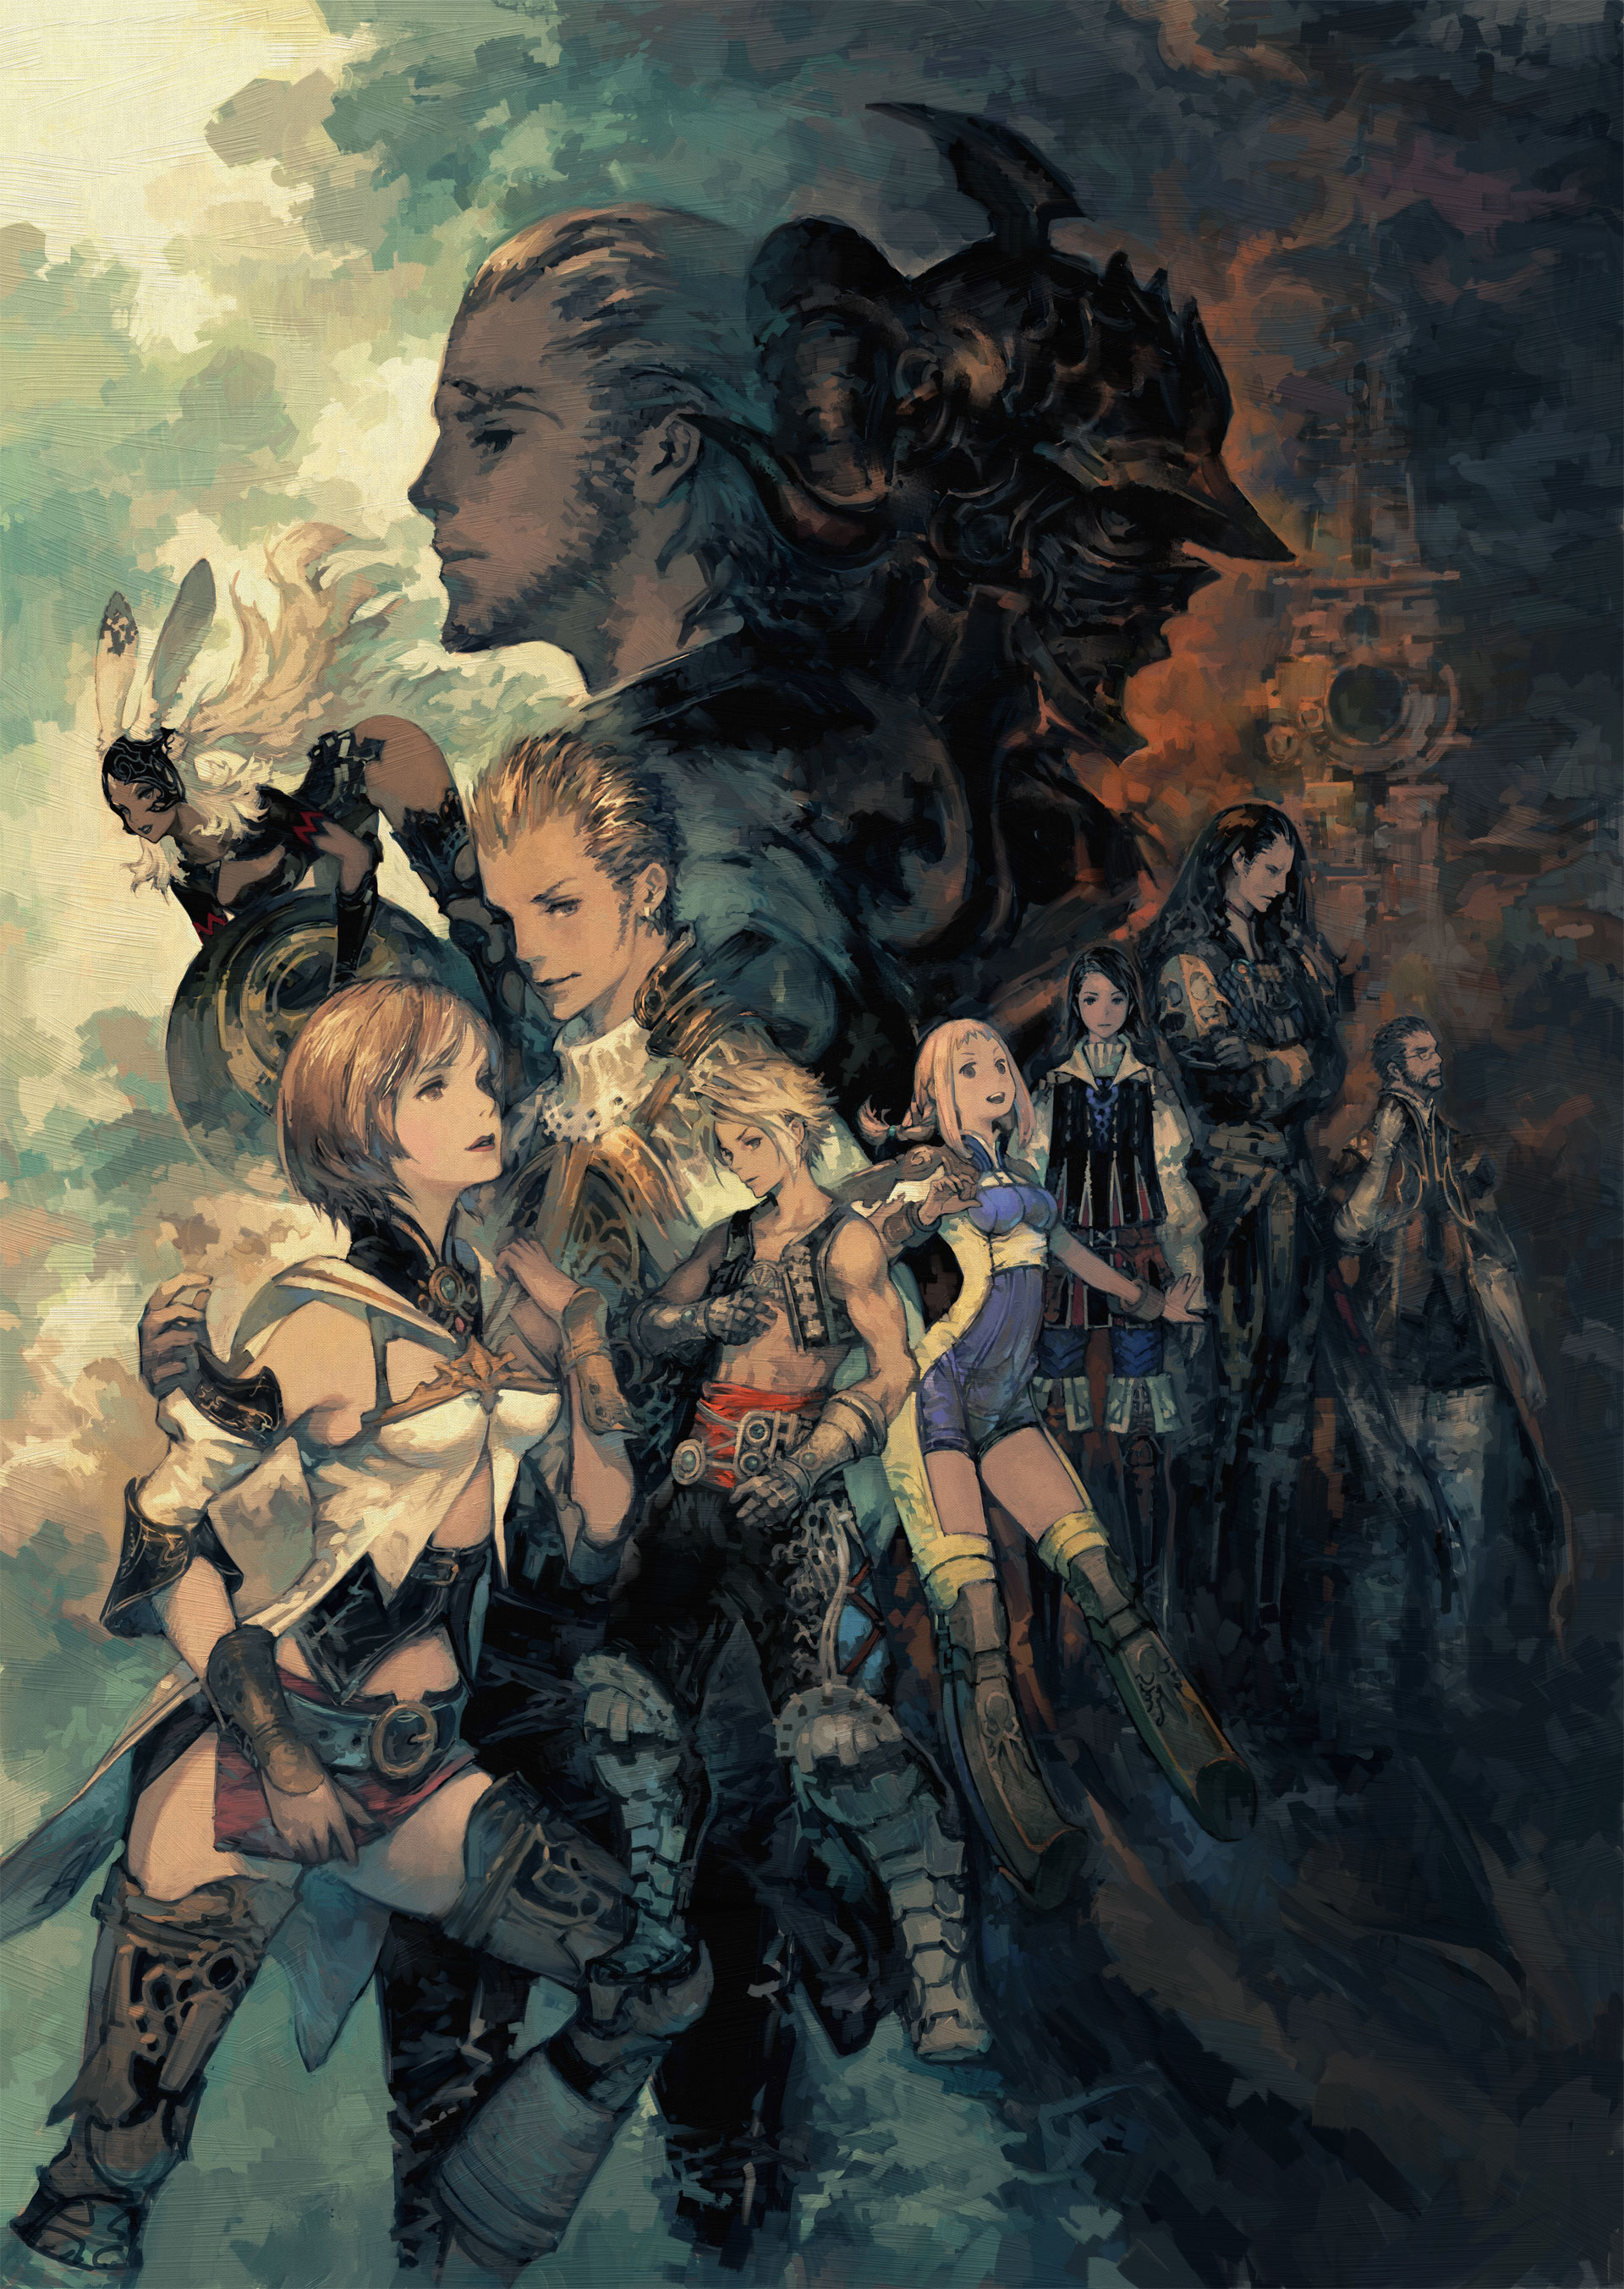 Final Fantasy Xii The Zodiac Age Sweet Memories Of Ivalice Sky Pirate S Den